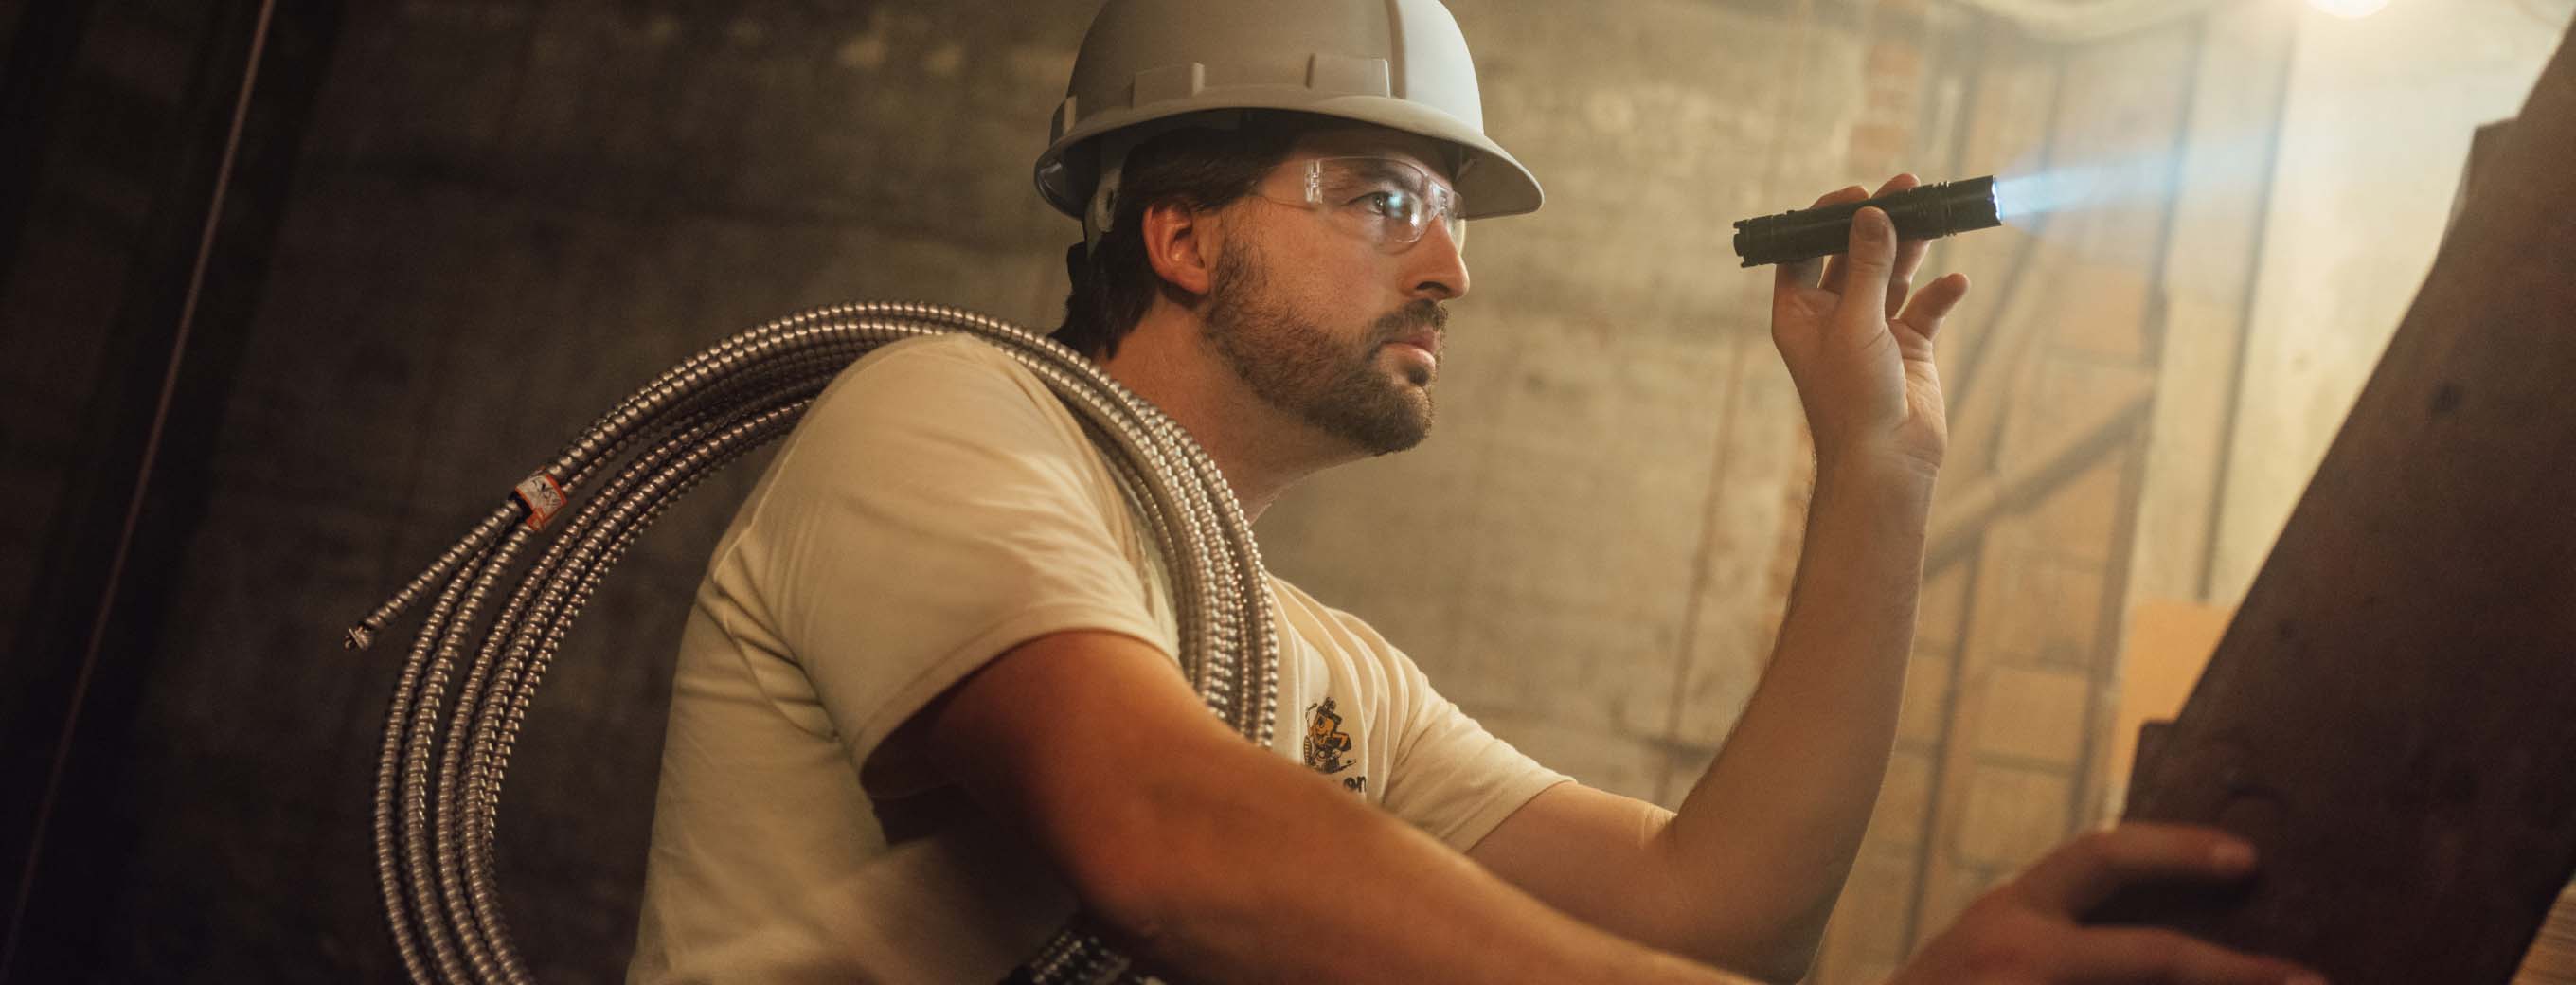 A person in a hard hat is holding a flashlight.